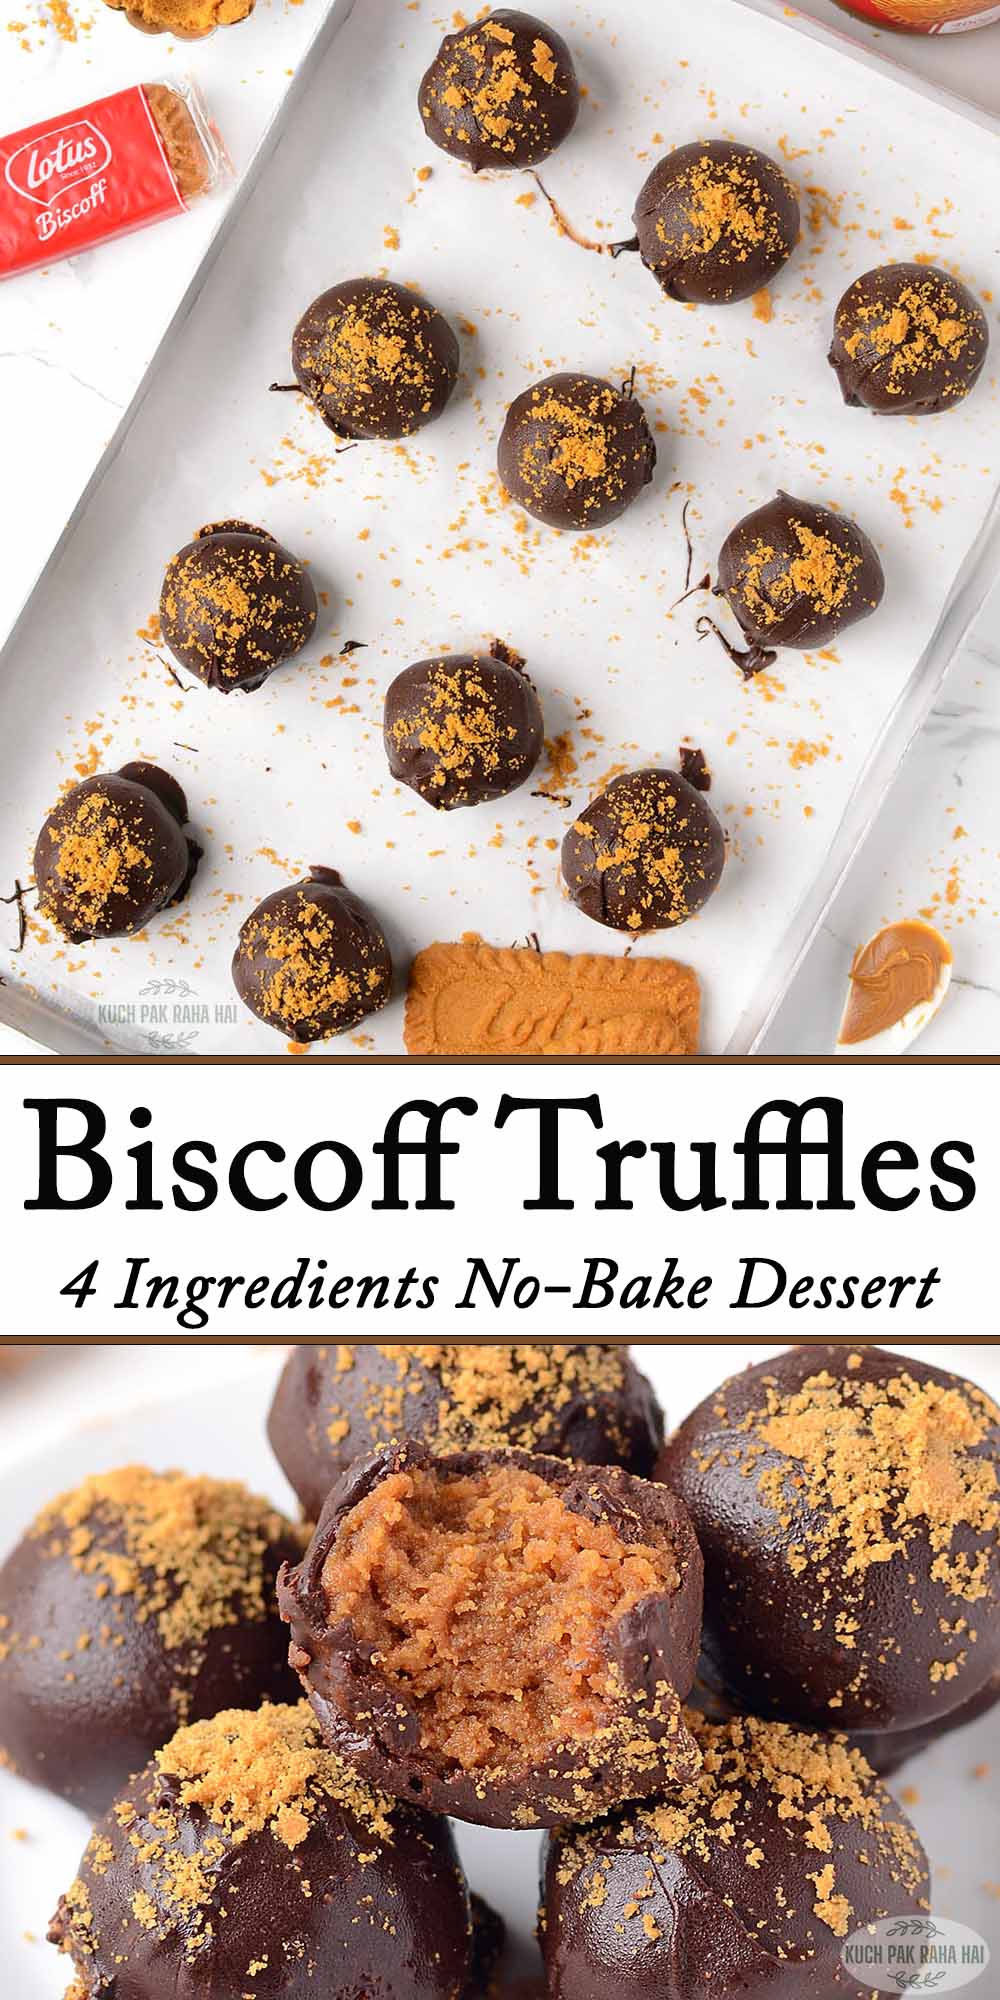 Biscoff Truffles with bicsoff cookie spread, cookies & cream cheese.